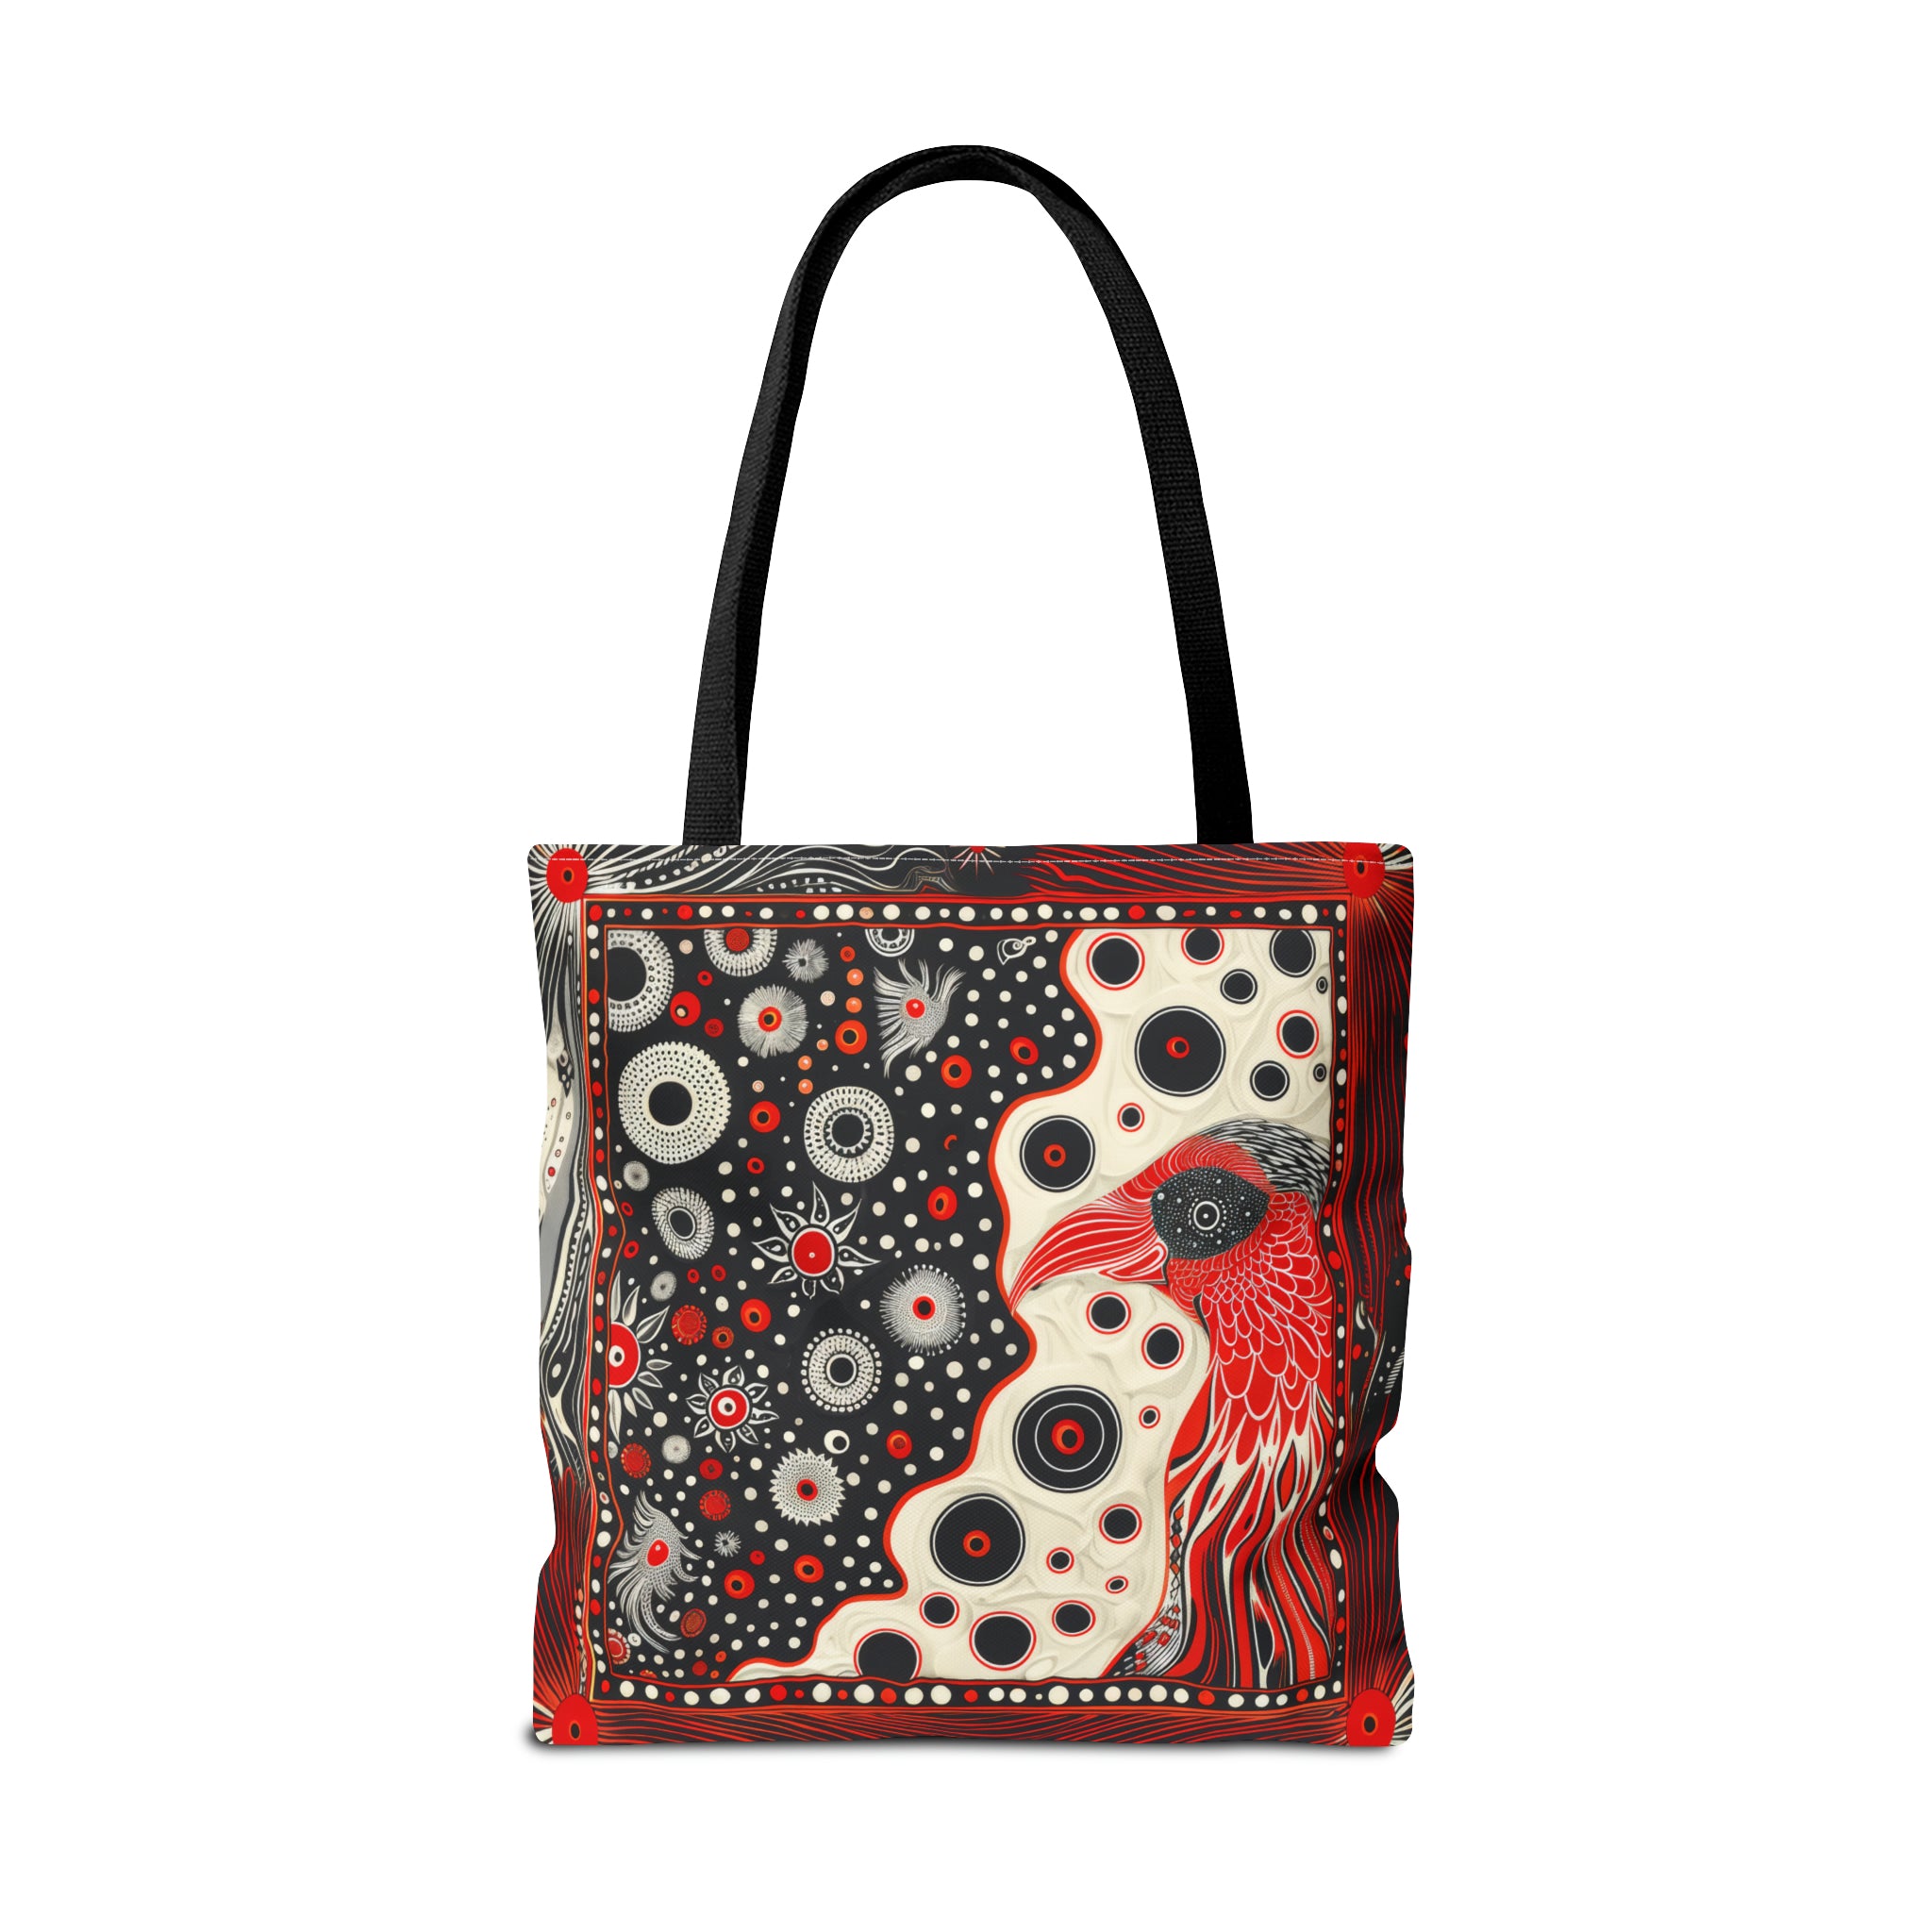 Canvas Tote Bag, Mod Red bird design, modern art inspired whimsical printed colorful design, Accessory bag, all over print